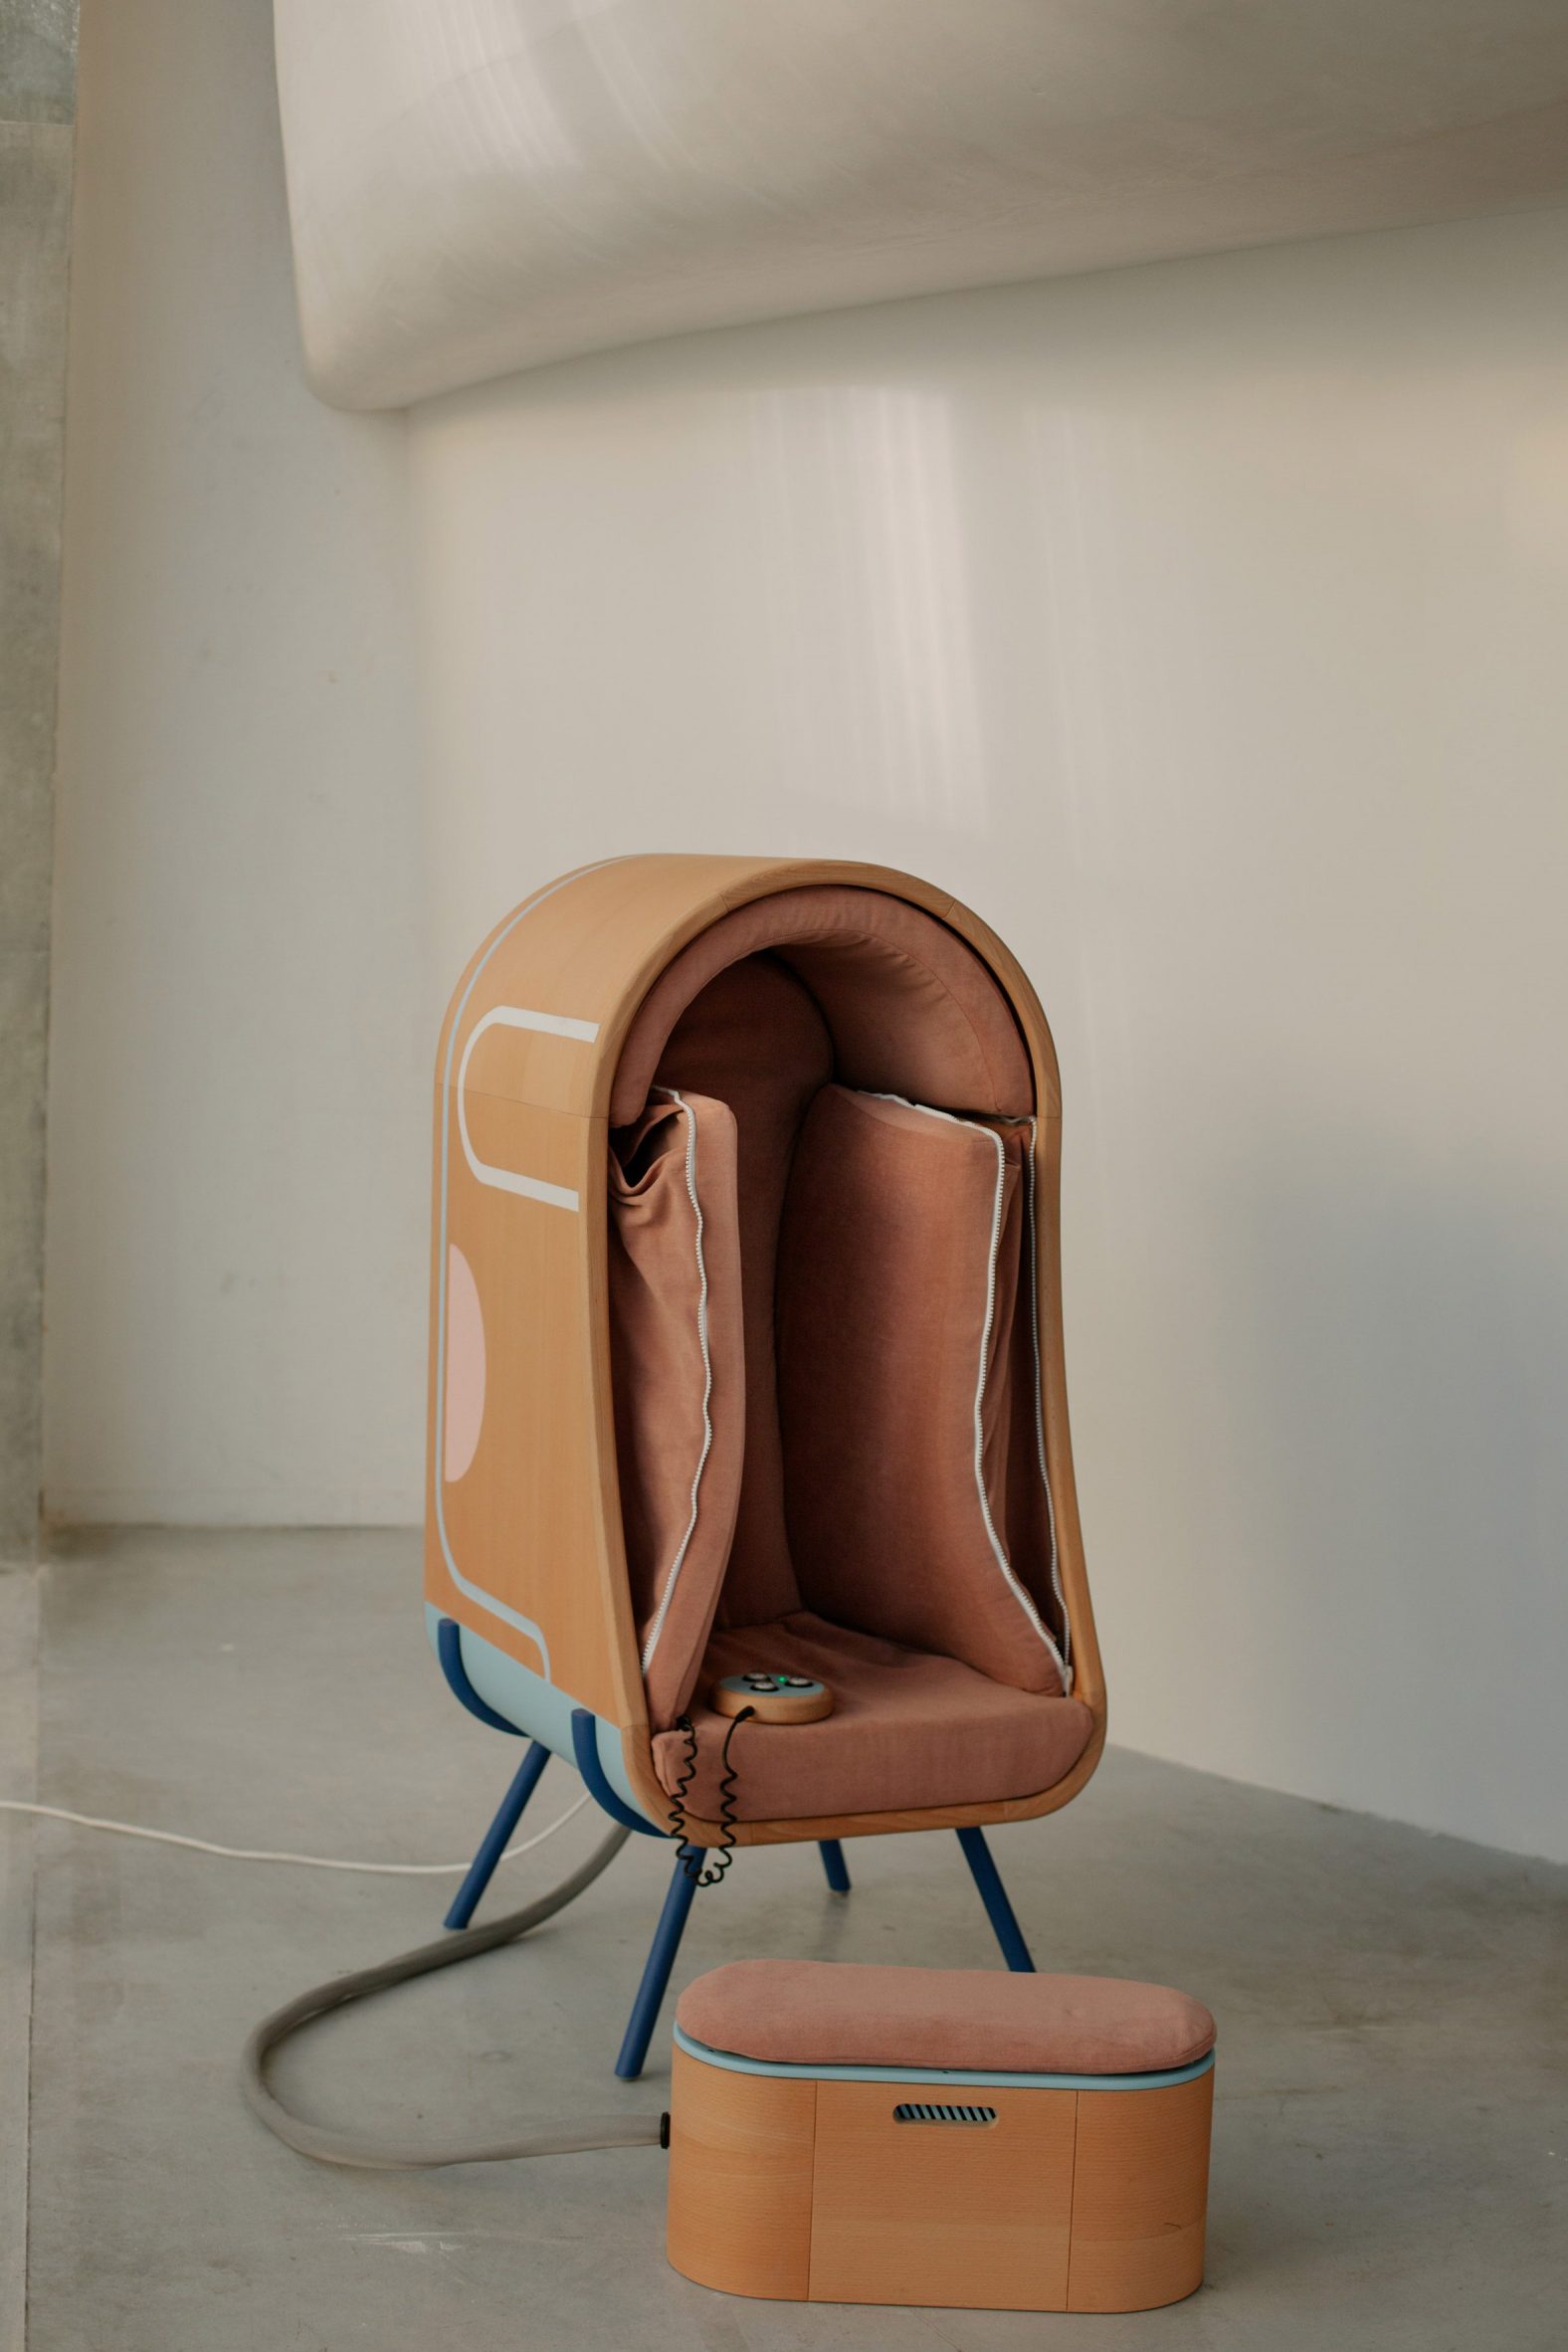 Inflating OTO Chair Is Designed To Hug And Comfort People With